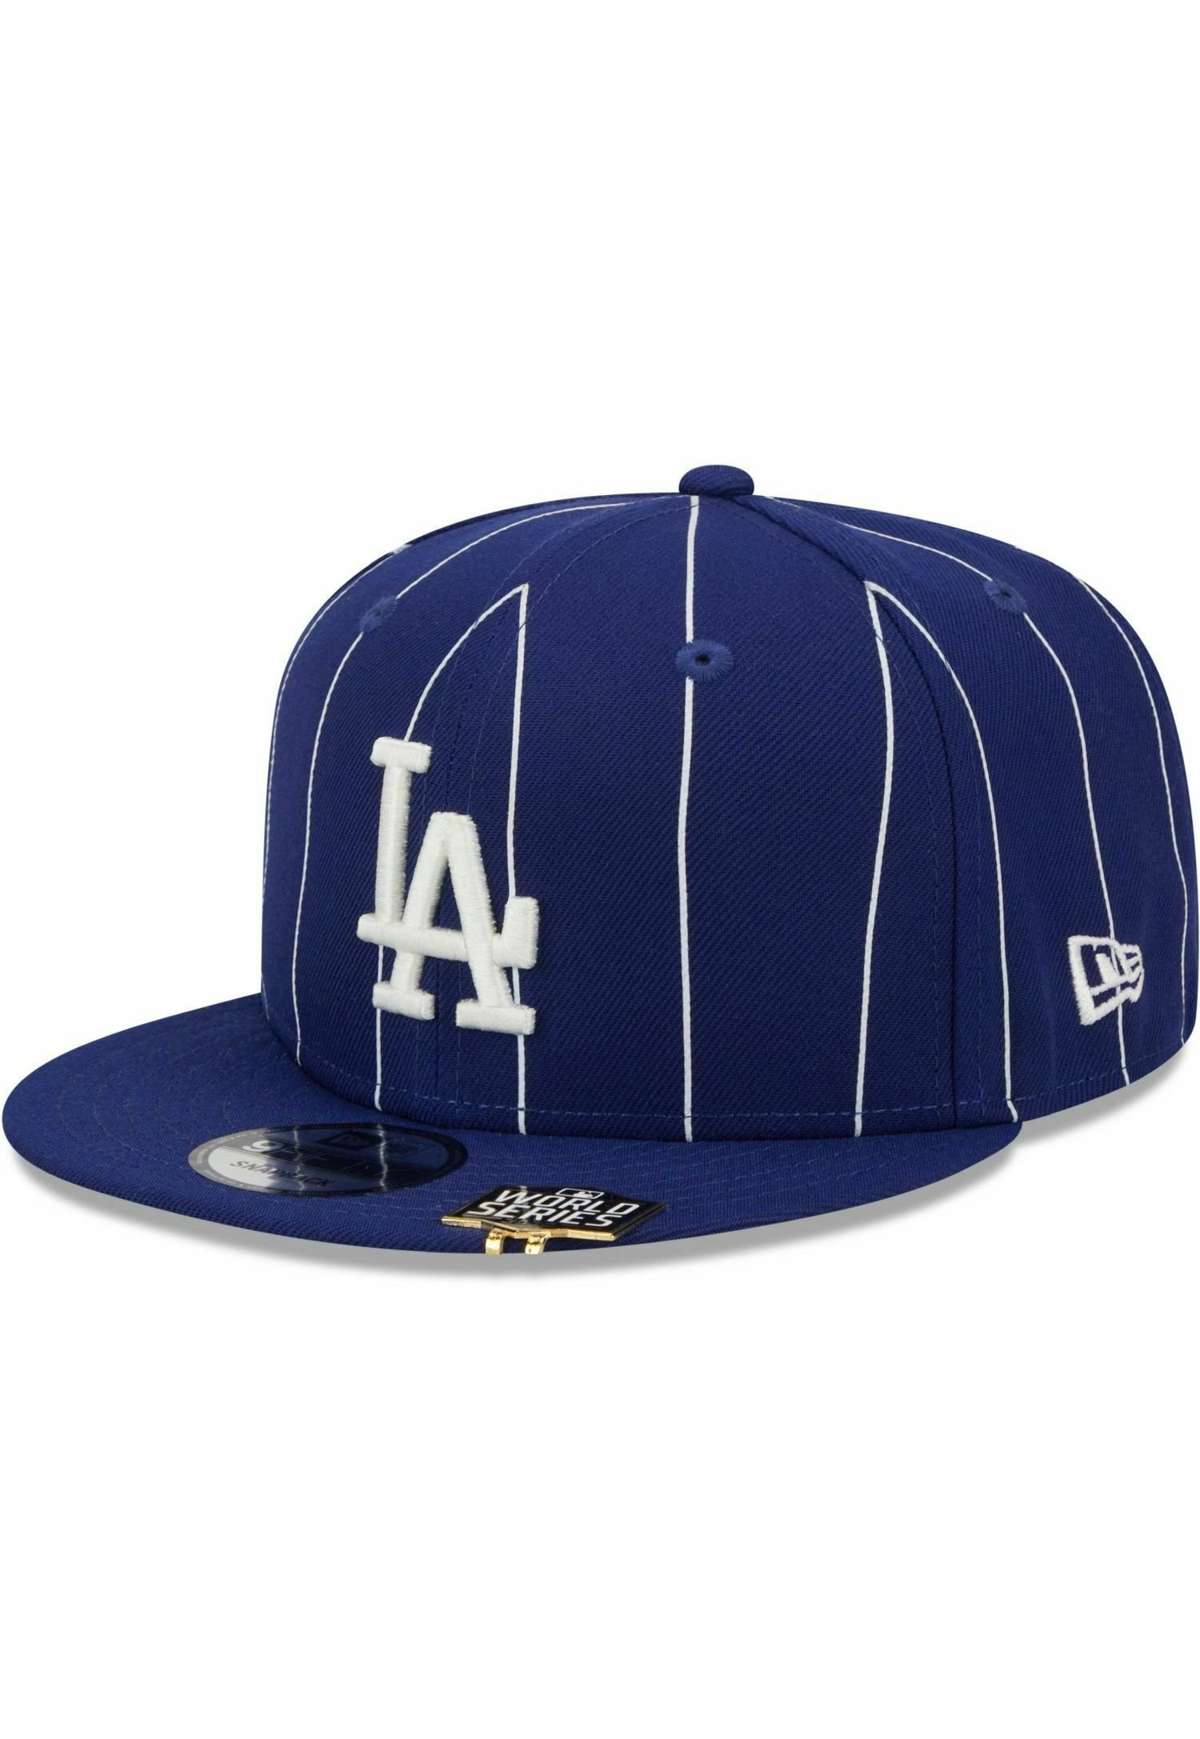 Кепка 9FIFTY PINSTRIPE LOS ANGELES DODGERS